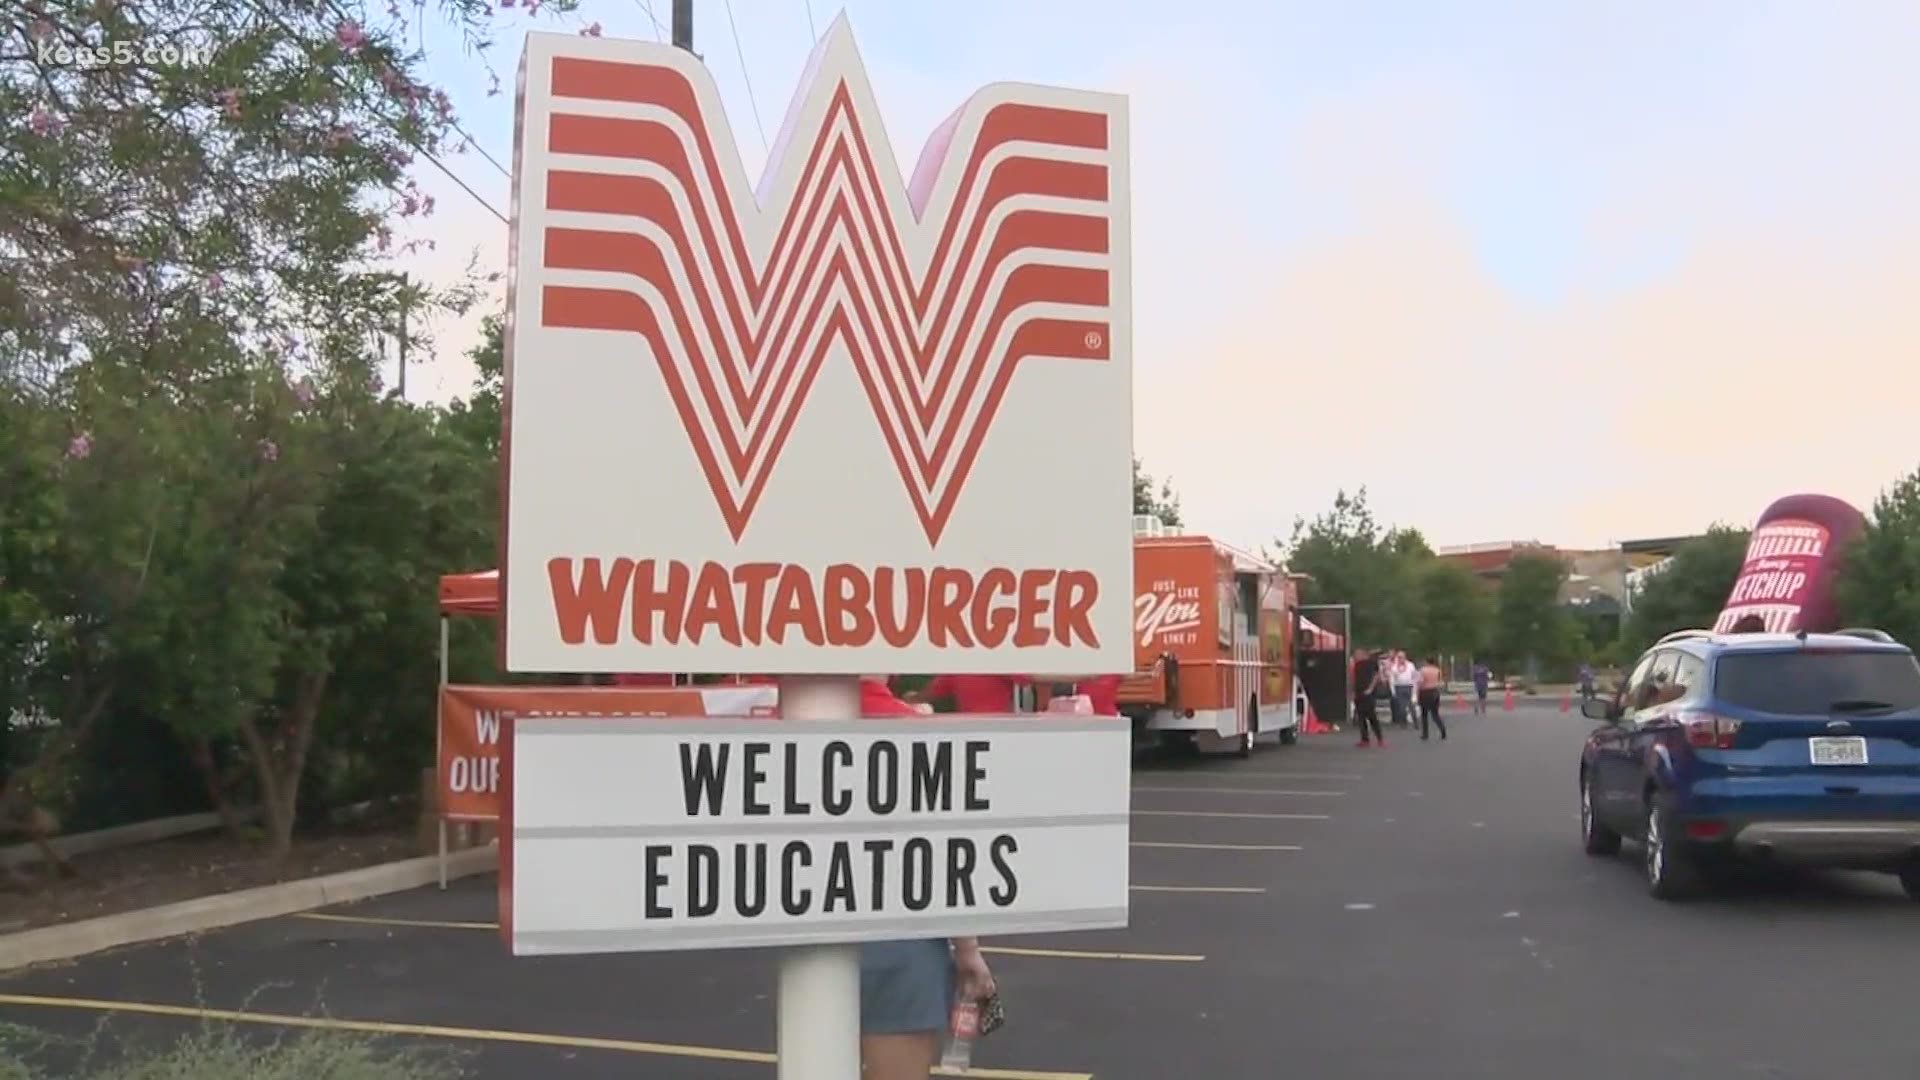 Whataburger unveiled their new food truck on Thursday. The truck was used to feed local teachers and hand out school supplies.